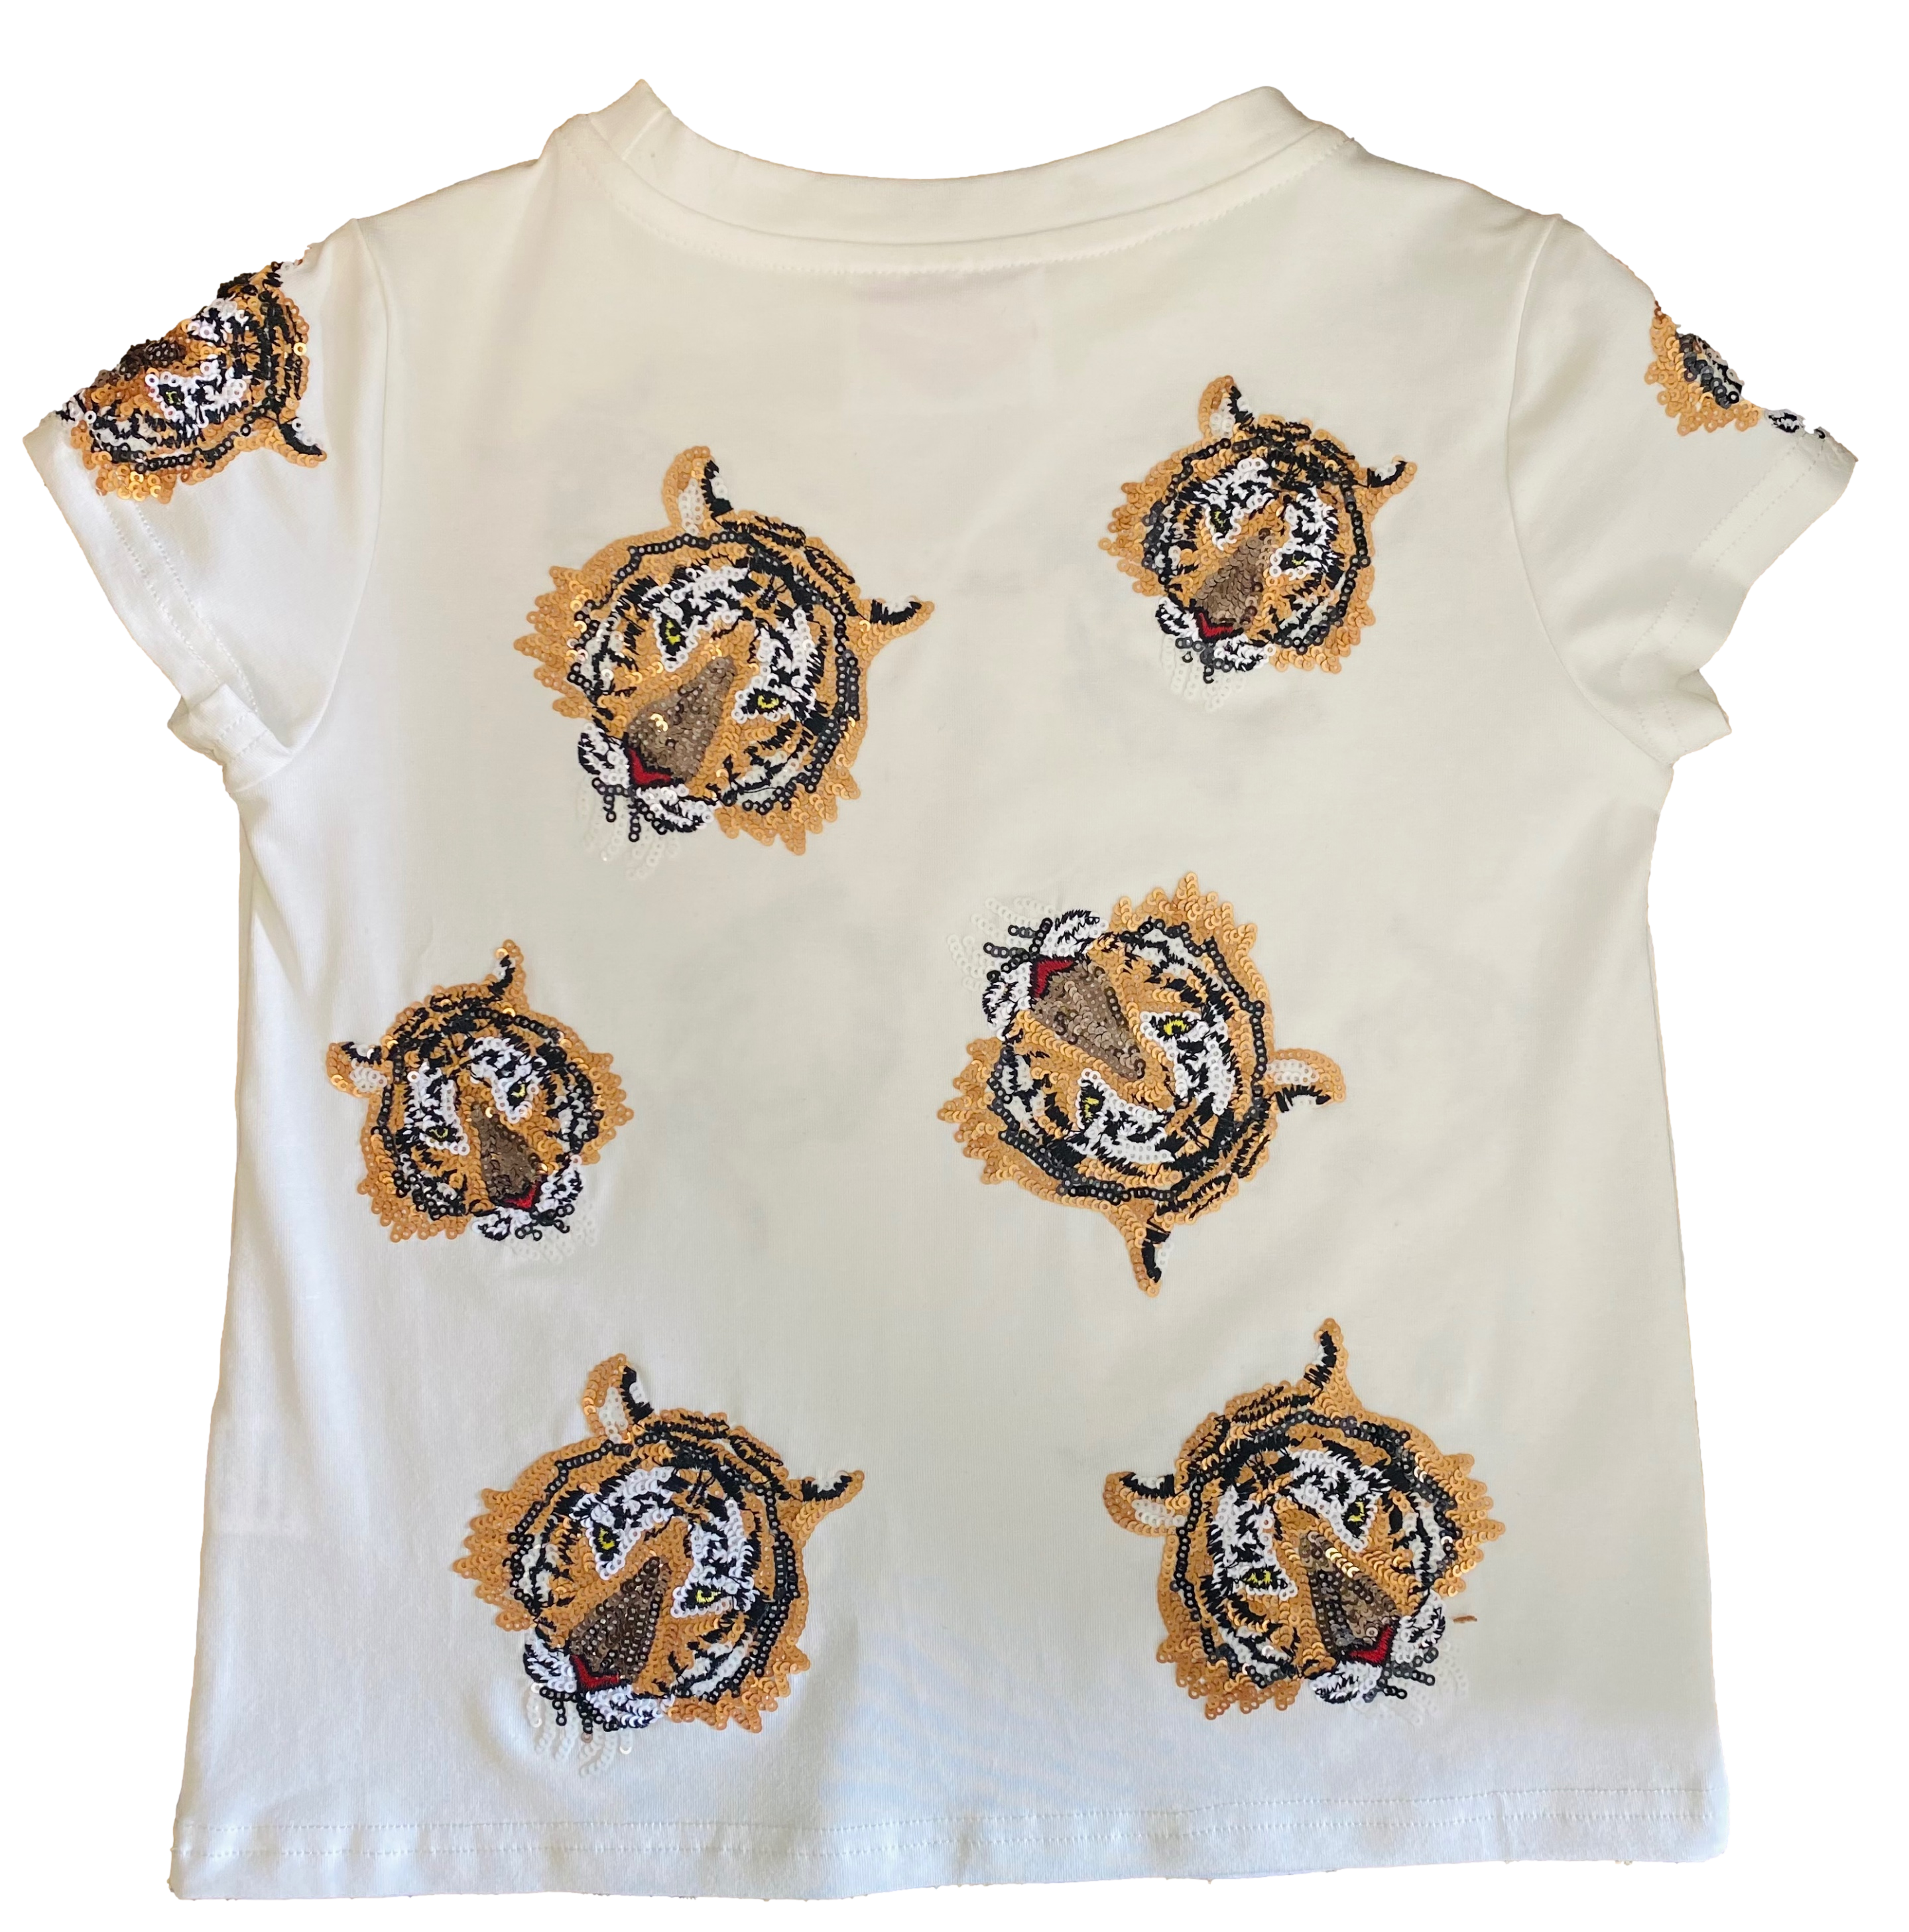 Gold KIDS Tiger Takeover Tee